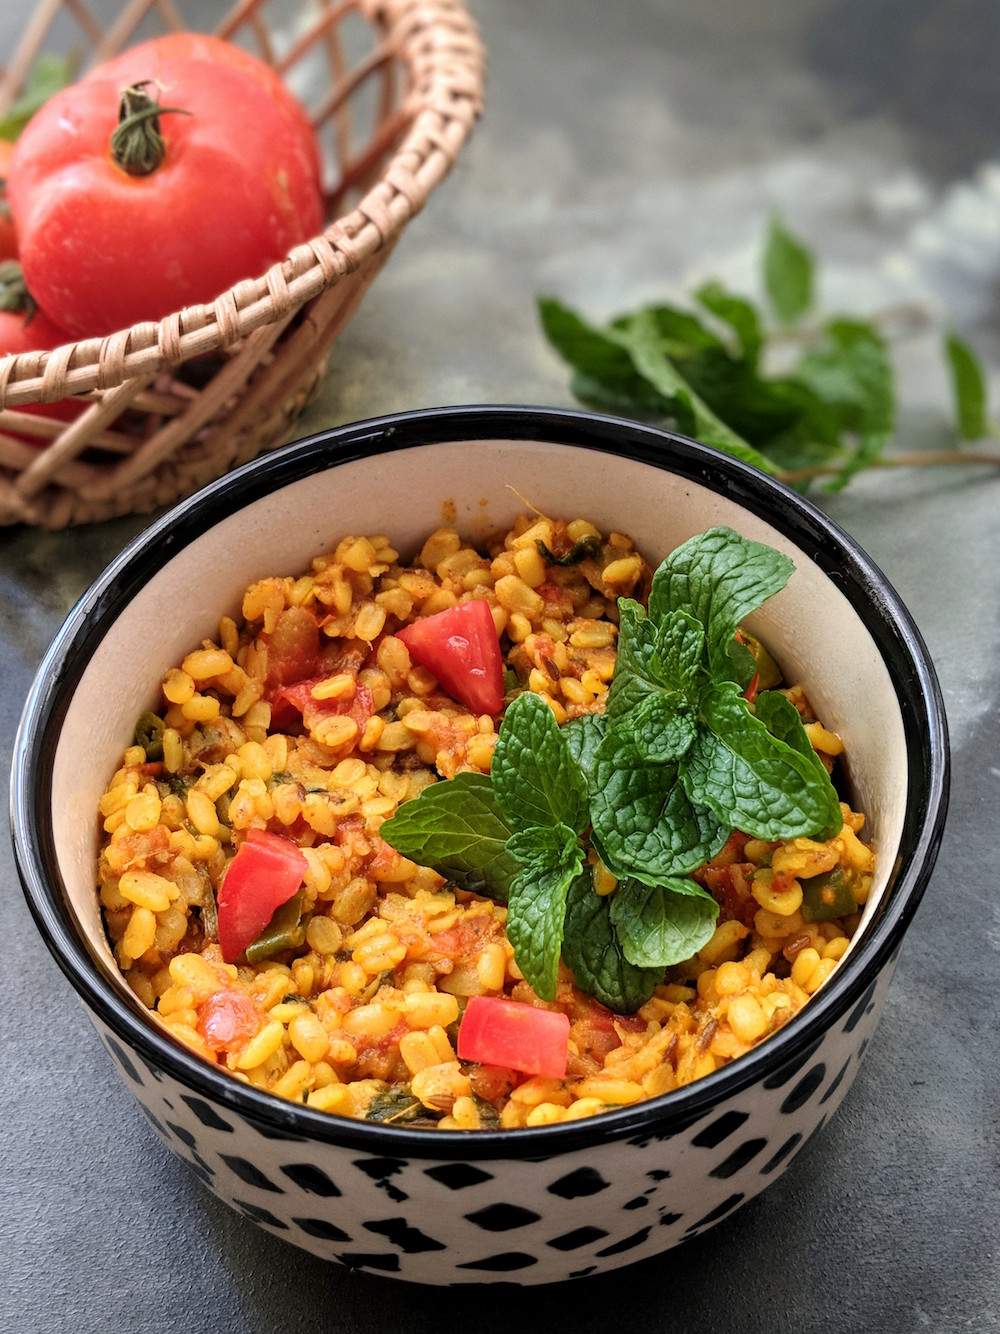 moong dal recipe with tomato and mint